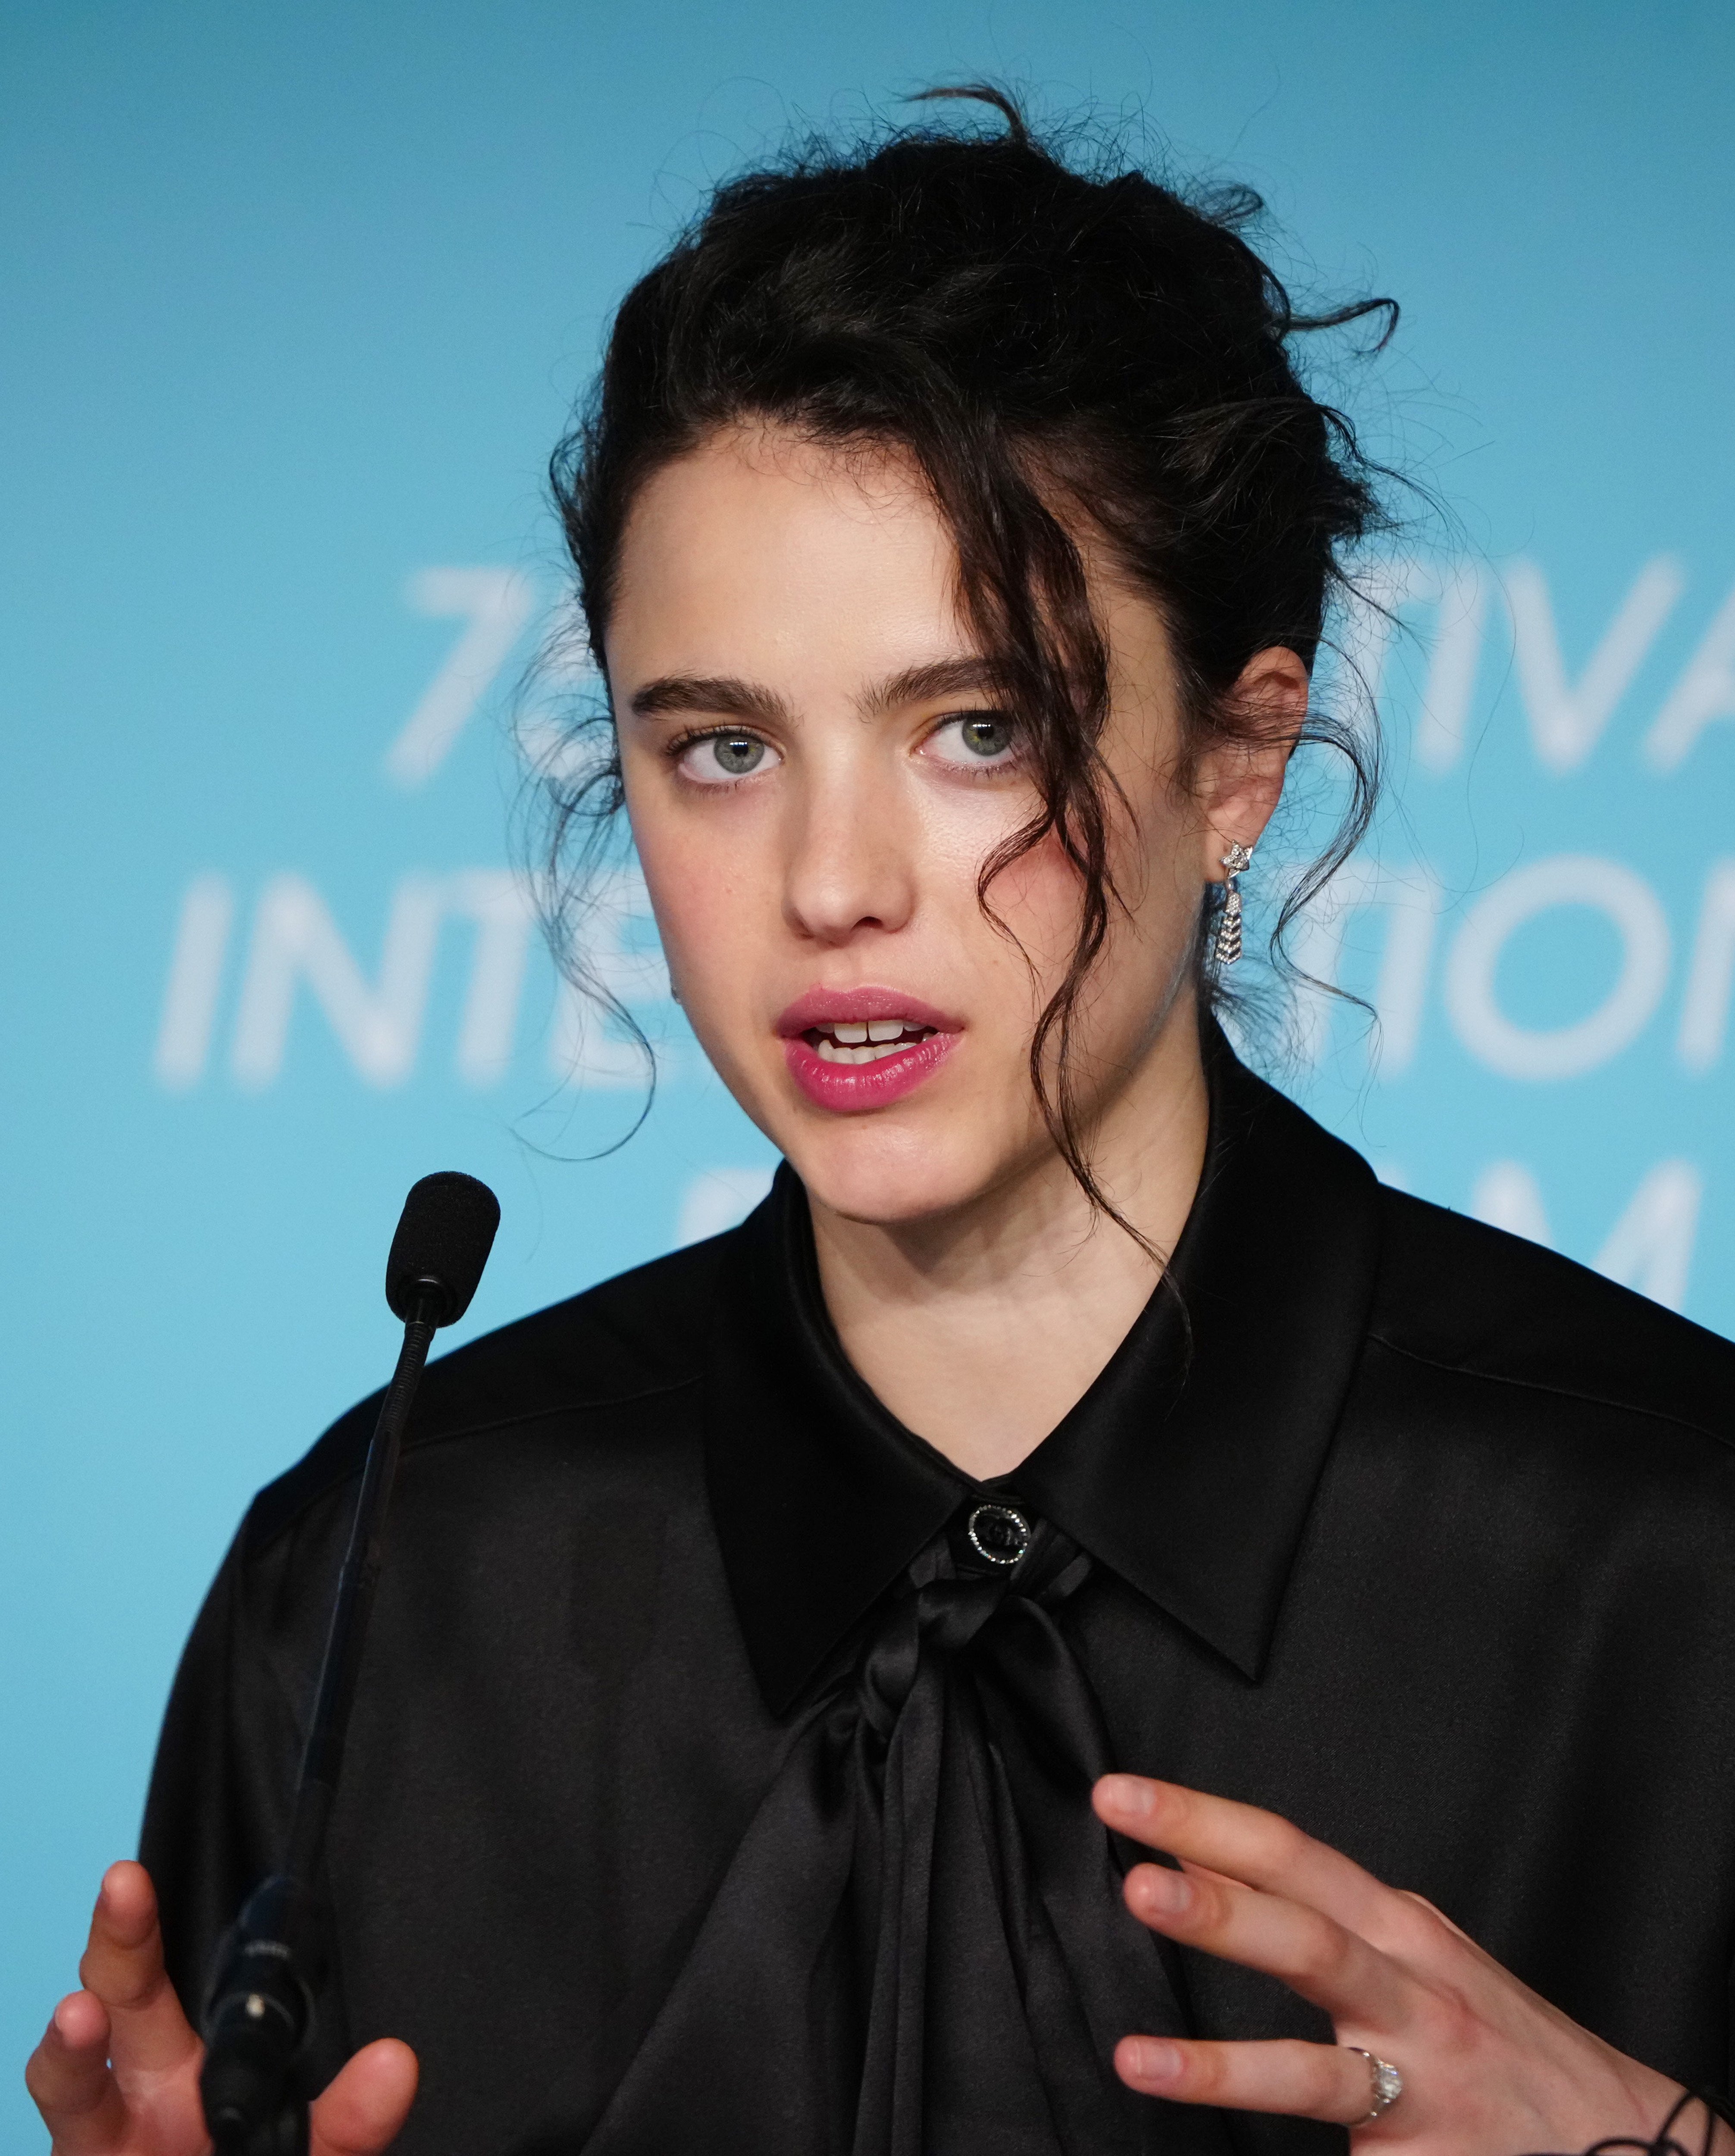 Margaret Qualley at the press conference for "Stars At Noon" during the 75th annual Cannes film festival on May 26, 2022 | Source: Getty Images